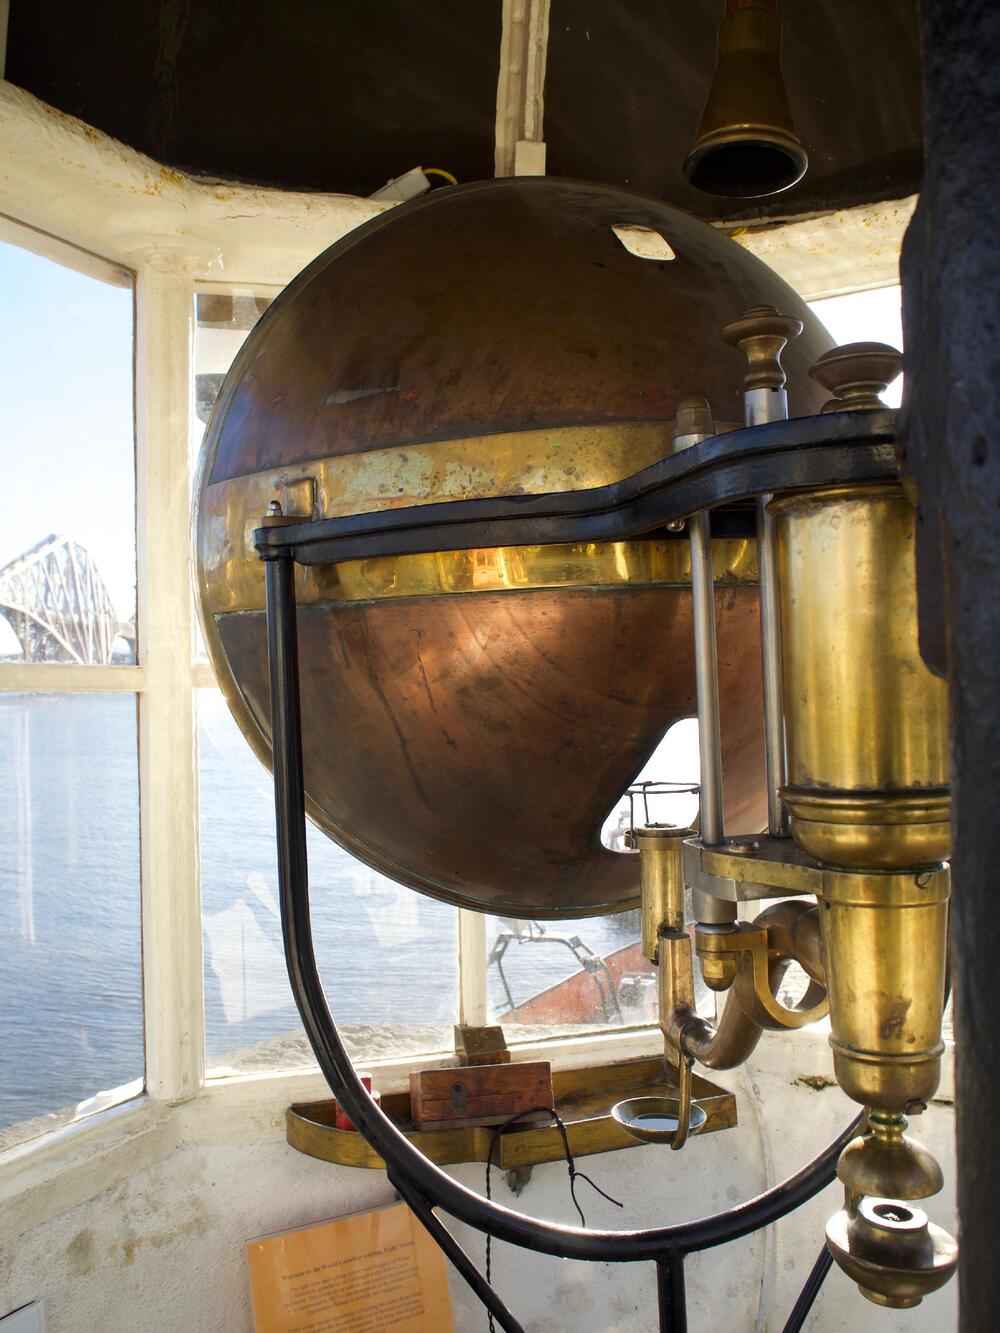 The back of a copper-coloured, parabolic lens looking out through a lighthouse window.